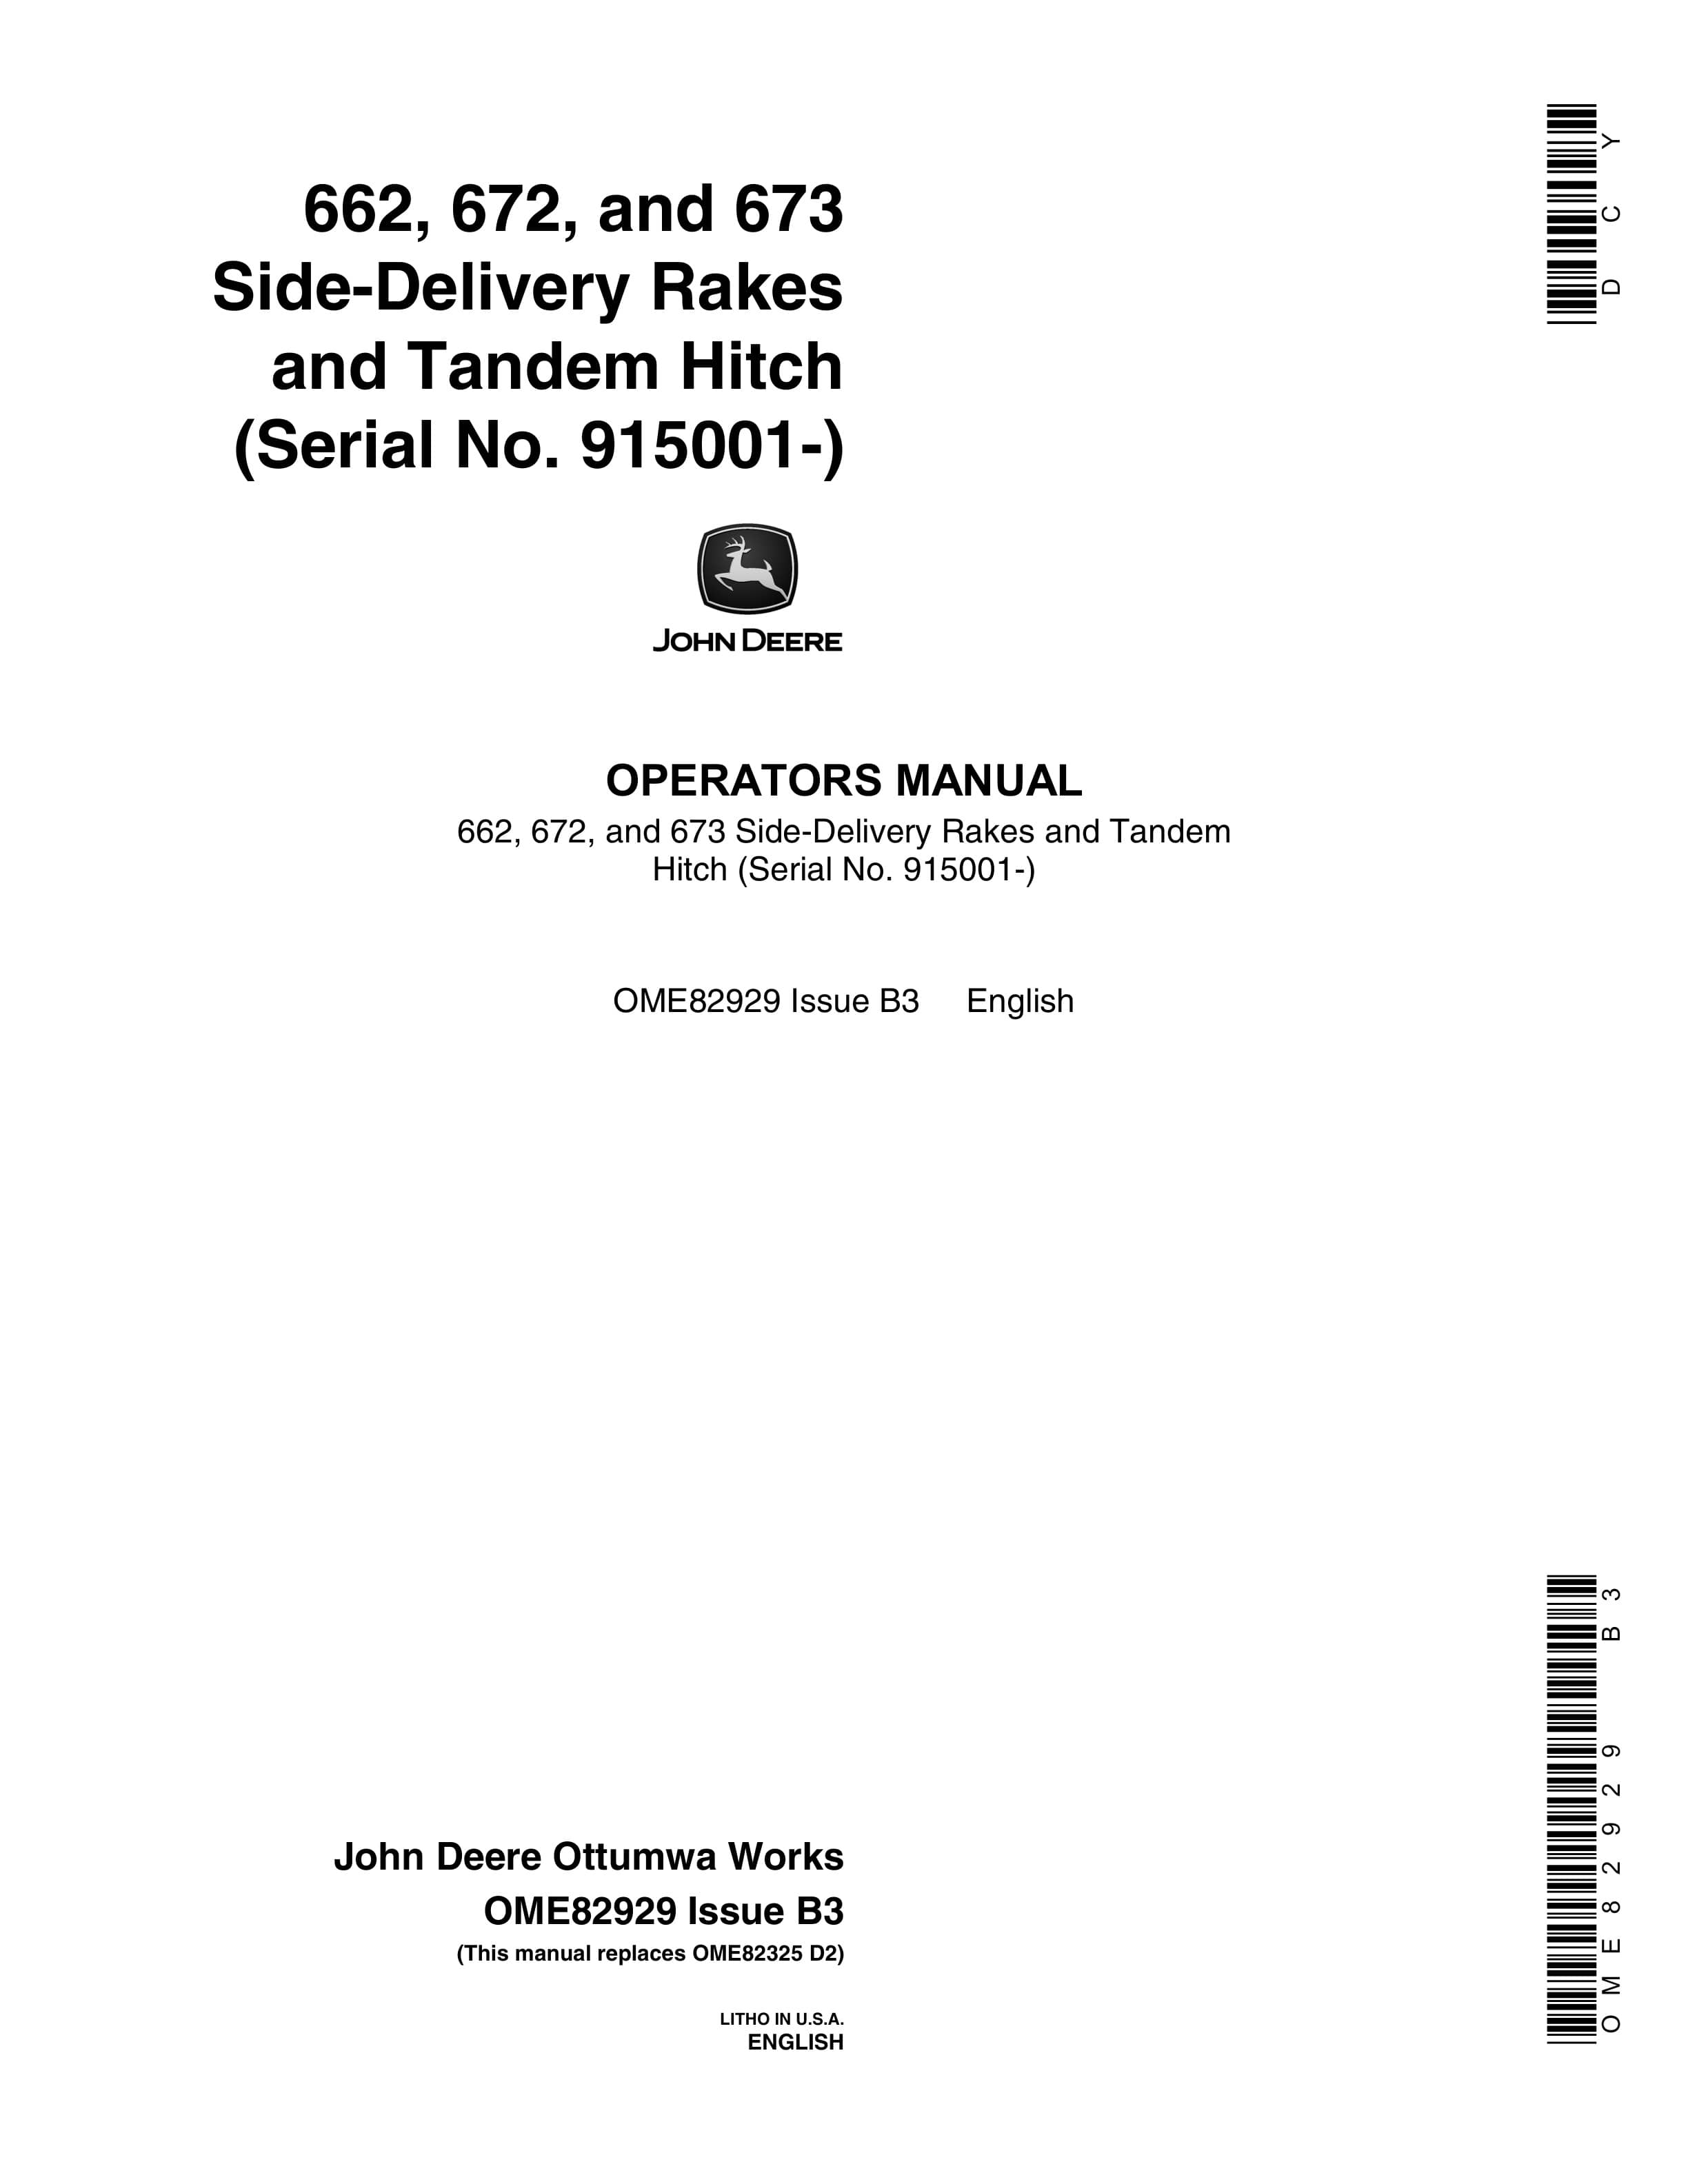 John Deere Tandem Hitch and 662 672 and 673 Side Delivery Rakes Operator Manual OME82929 1